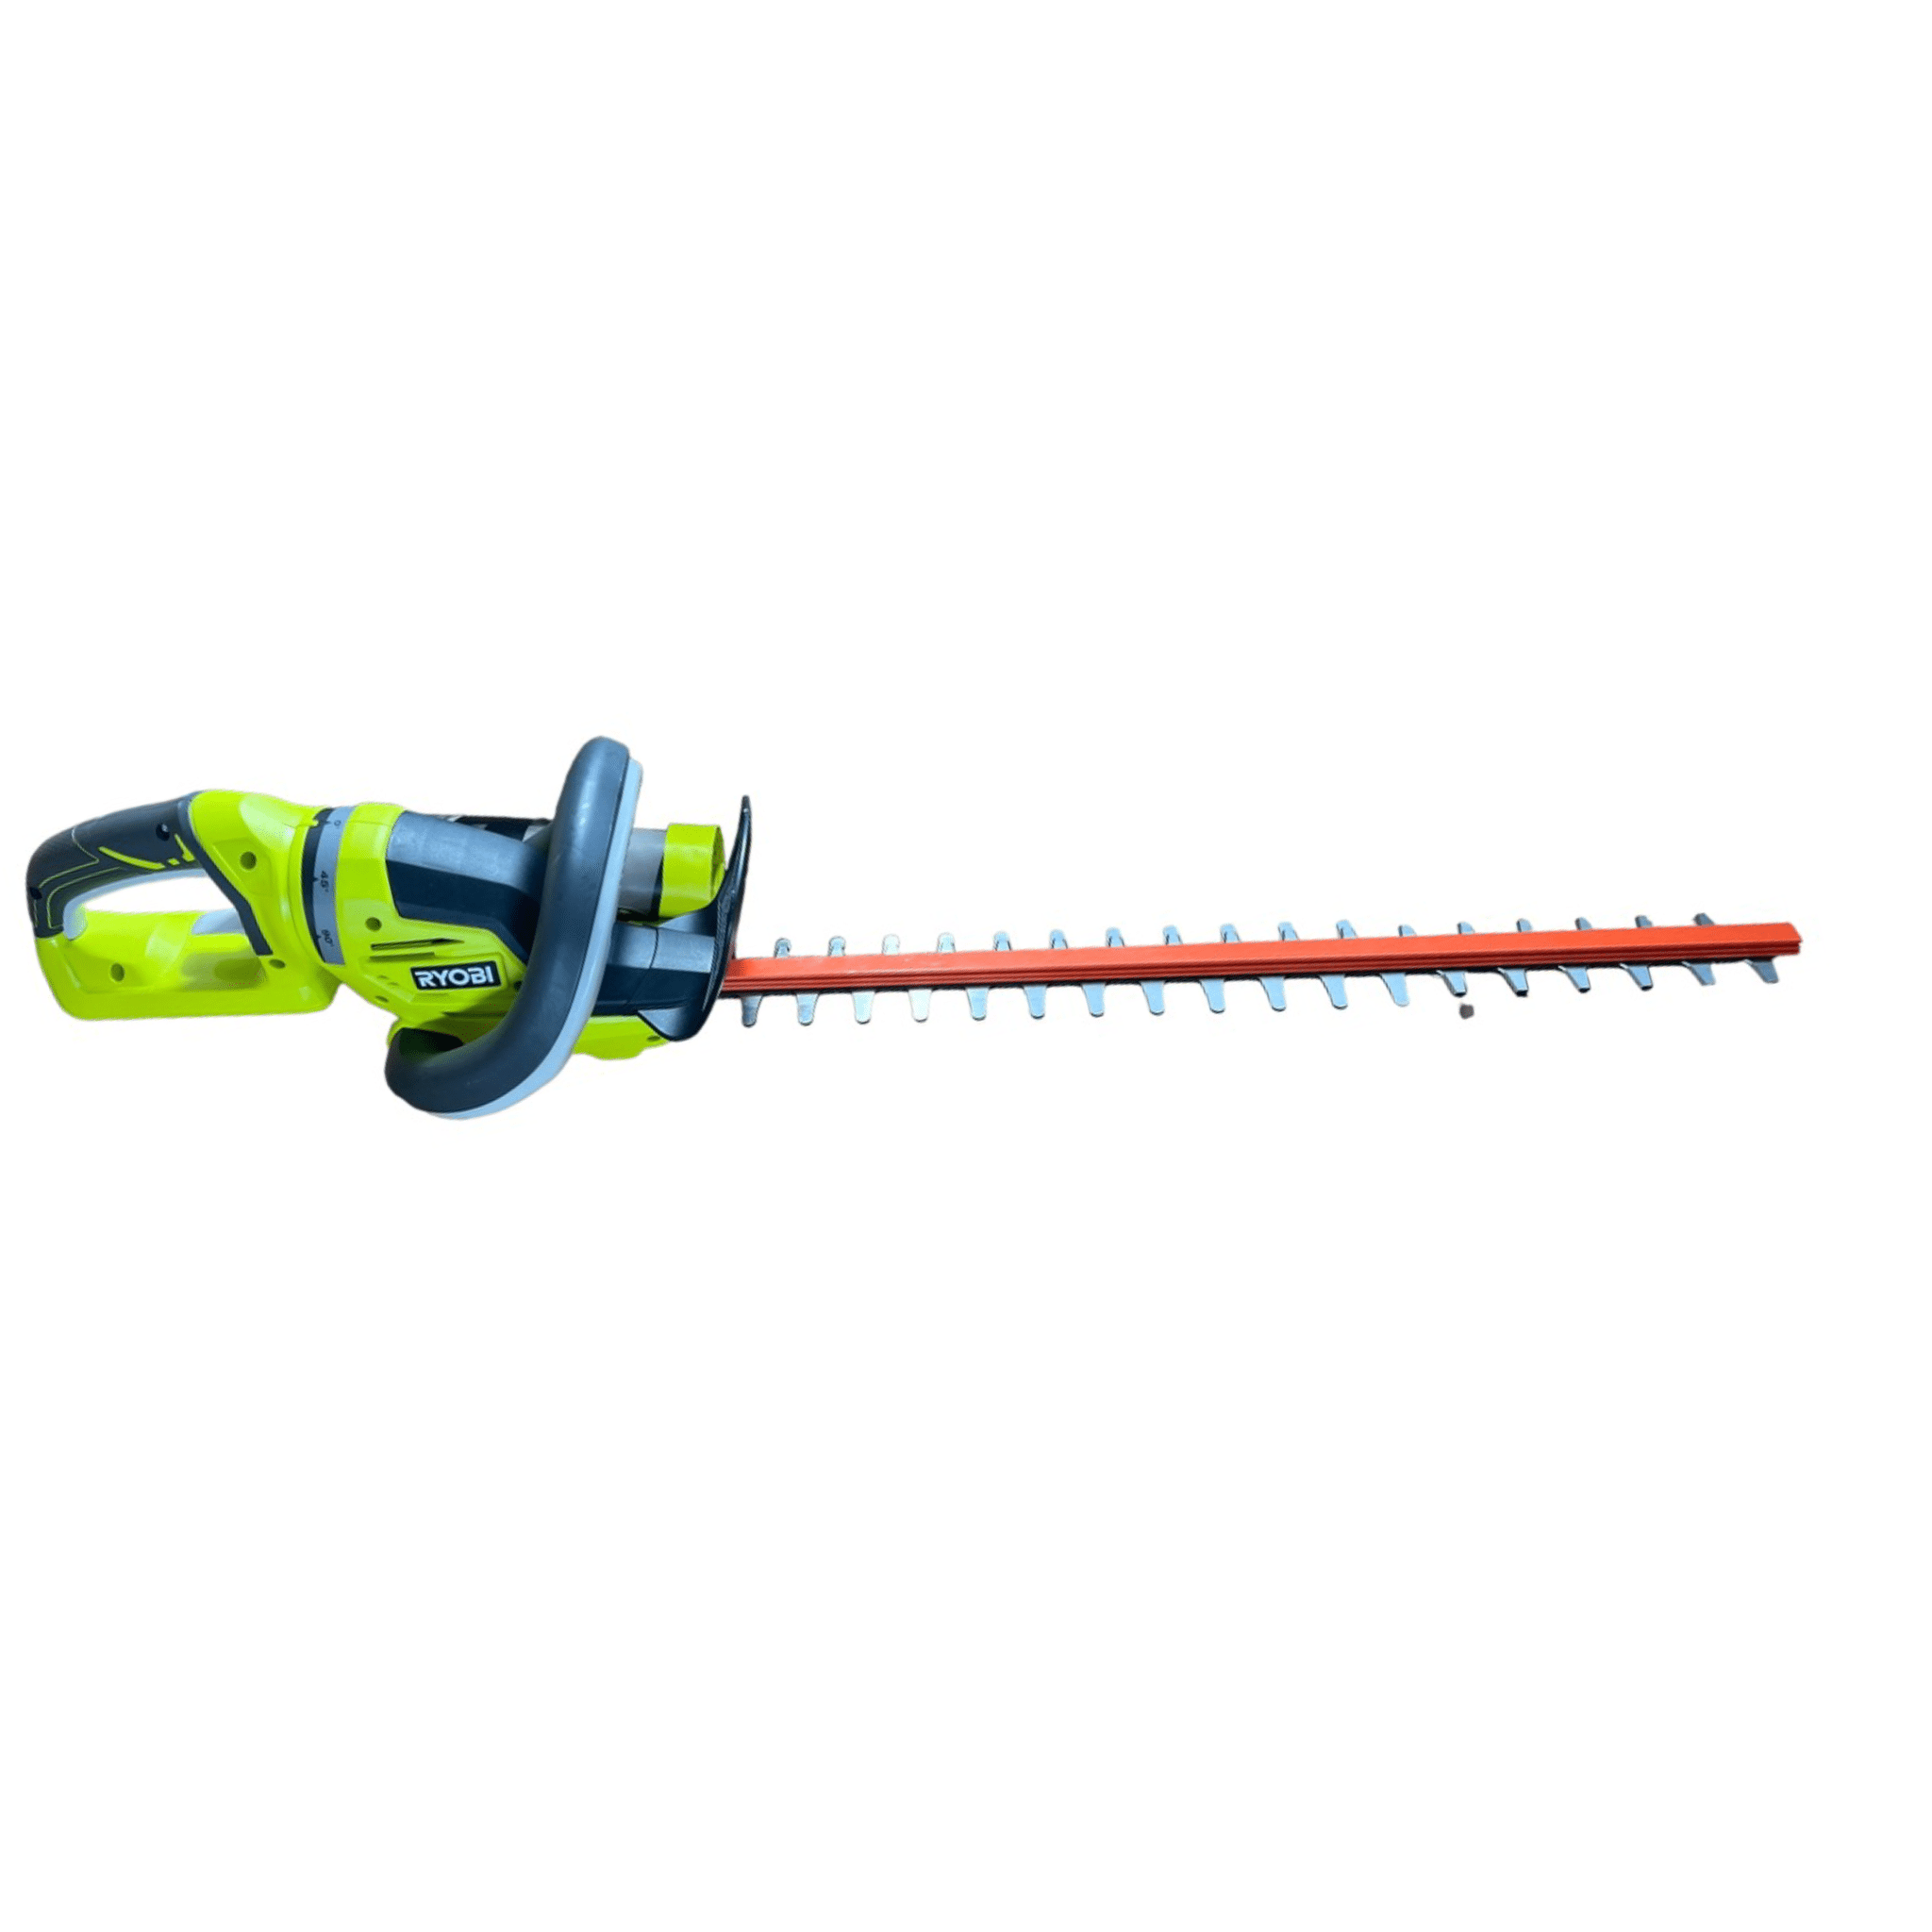 Swift 40V Cordless Pole Hedge Trimmer - Swift Series | 2 Batteries and 1 Charger